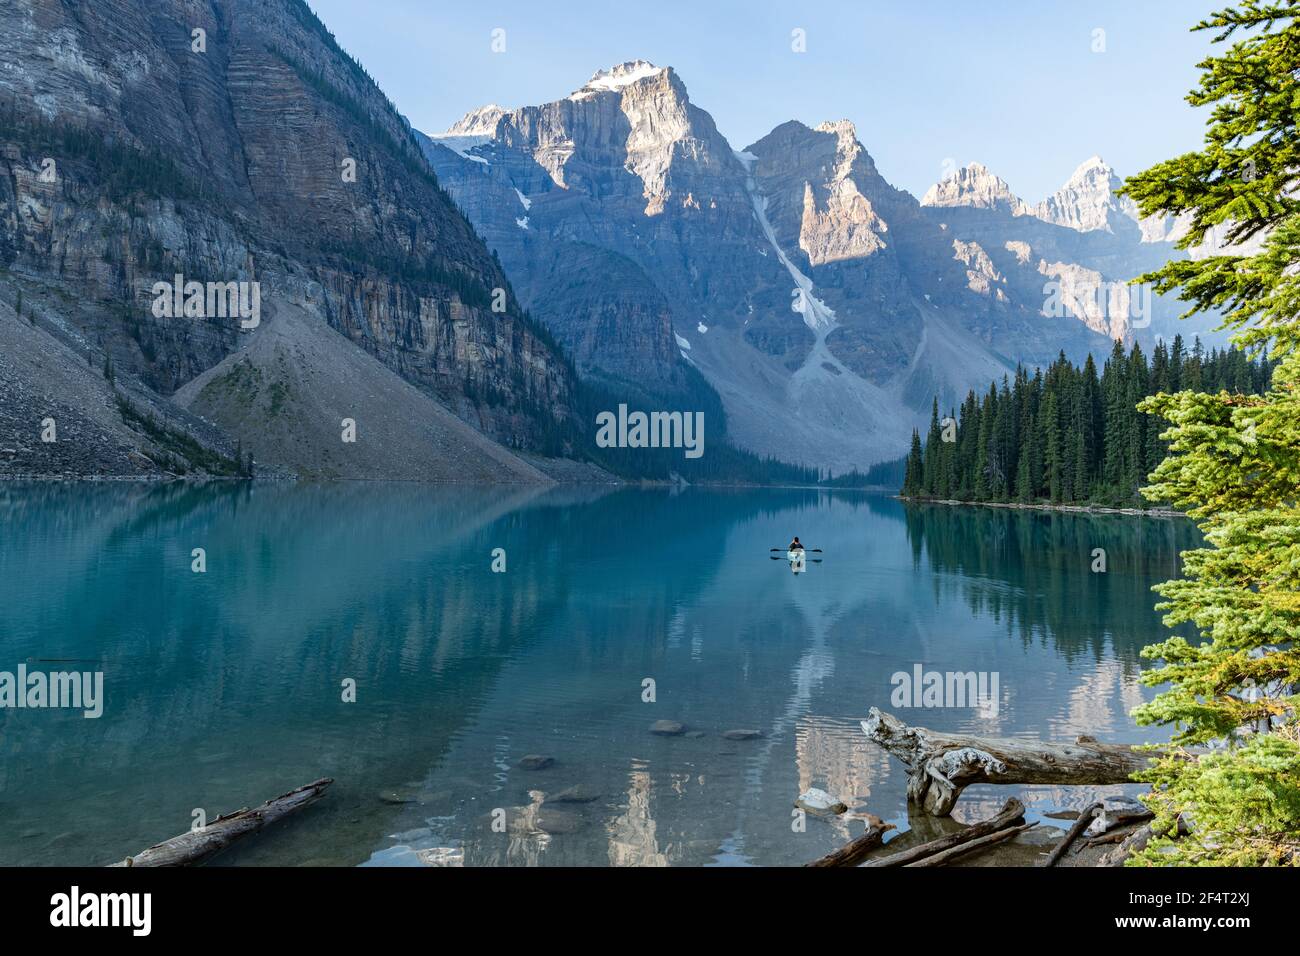 single canoeist on a tranquil Moraine Lake in the Rocky Mountains Stock Photo